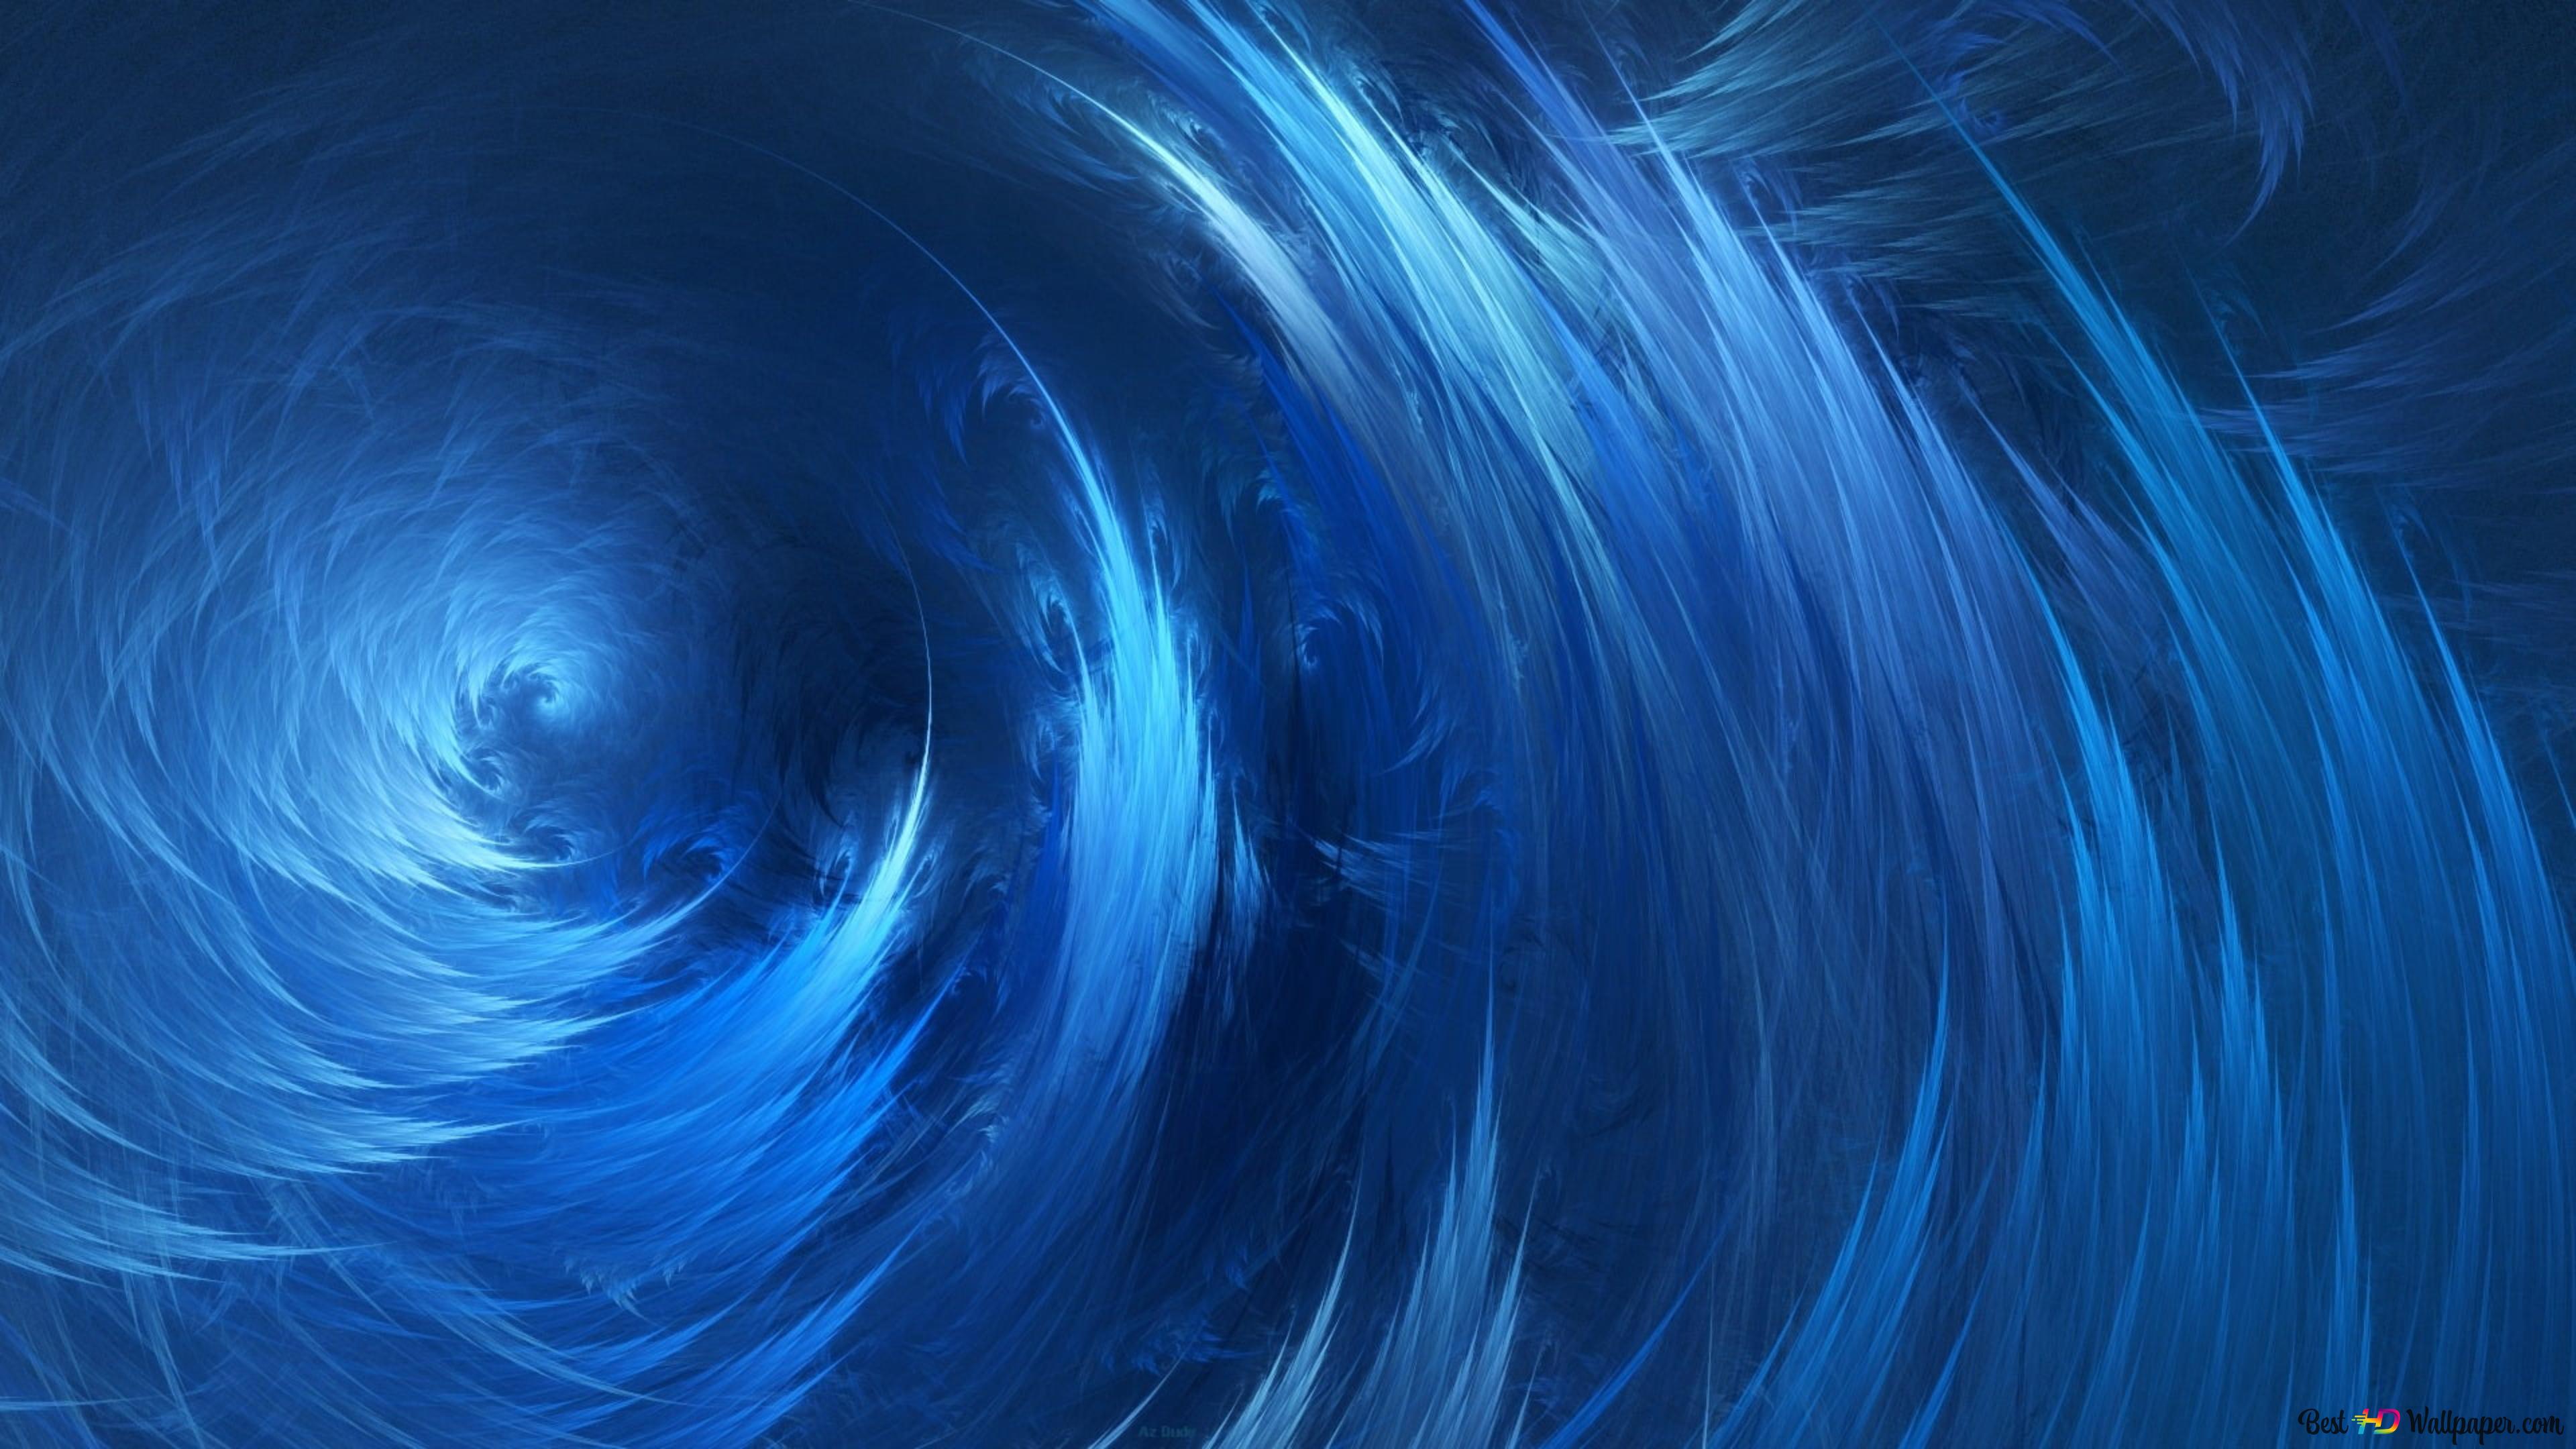 Blue and gray spiral k wallpaper download